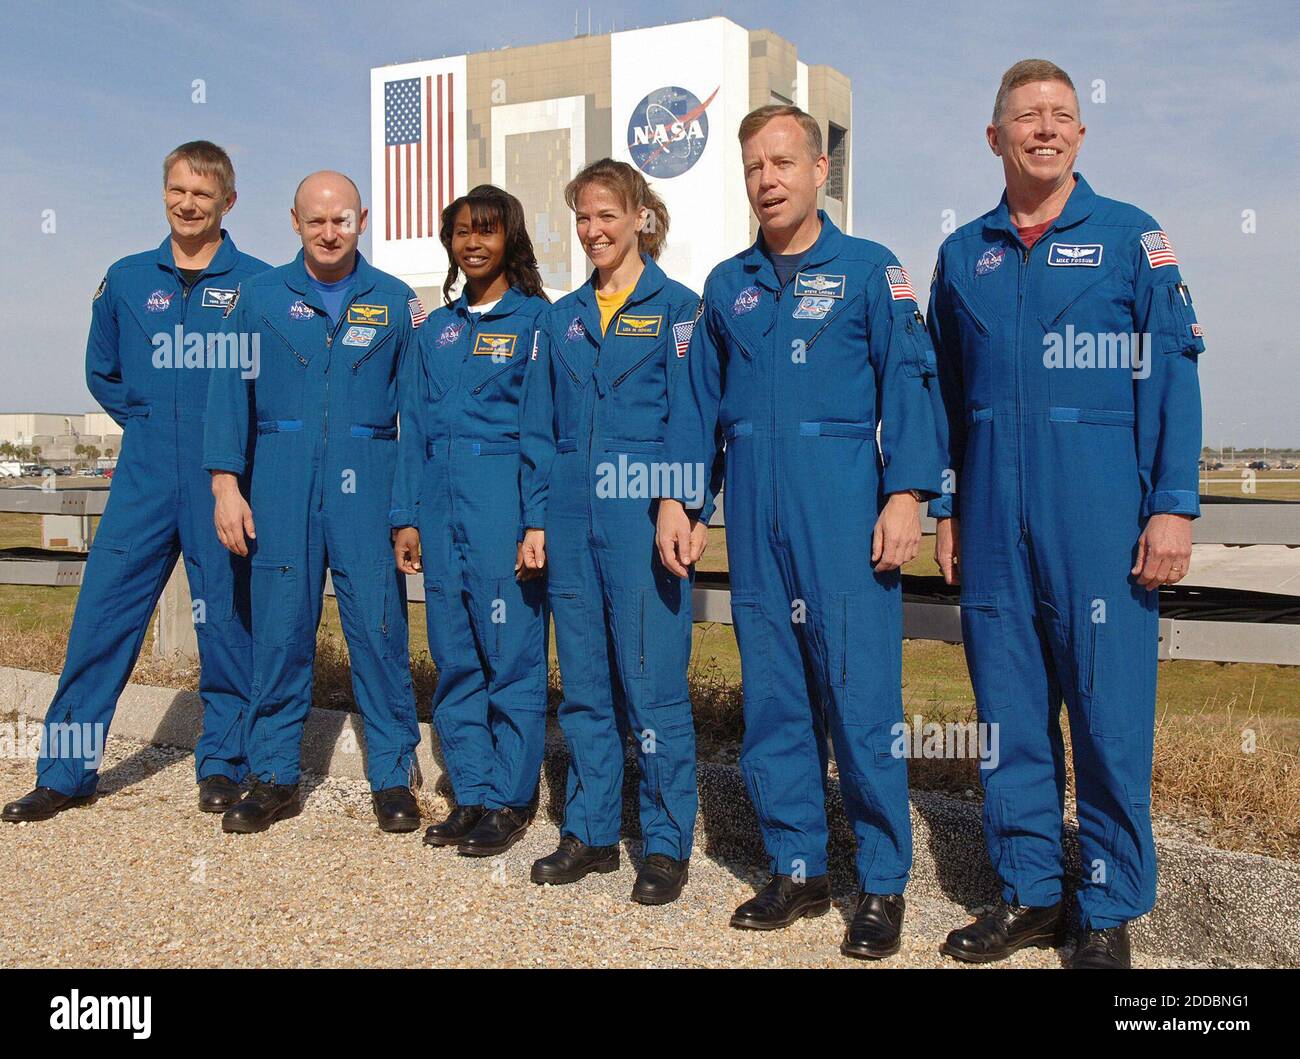 NO FILM, NO VIDEO, NO TV, NO DOCUMENTARY - Space shuttle Discovery, STS-121, crew members, from left, Mission Specialist Piers Sellers, Pilot Mark Kelly, Mission Specialists Stephanie Wilson, Lisa Nowak, Commander Steven Lindsey and Mission Specialist Michael Fossum pose for a photo February 17, 2006 at Kennedy Space Center in Florida. Six of the 7 crew members are taking part in the crew equipment interface test at the Kennedy Space Center. The STS-121 mission is scheduled to launch no earlier than May of 2006. Photo by Red Huber/Orlando Sentinel/KRT/ABACAPRESS.COM Stock Photo